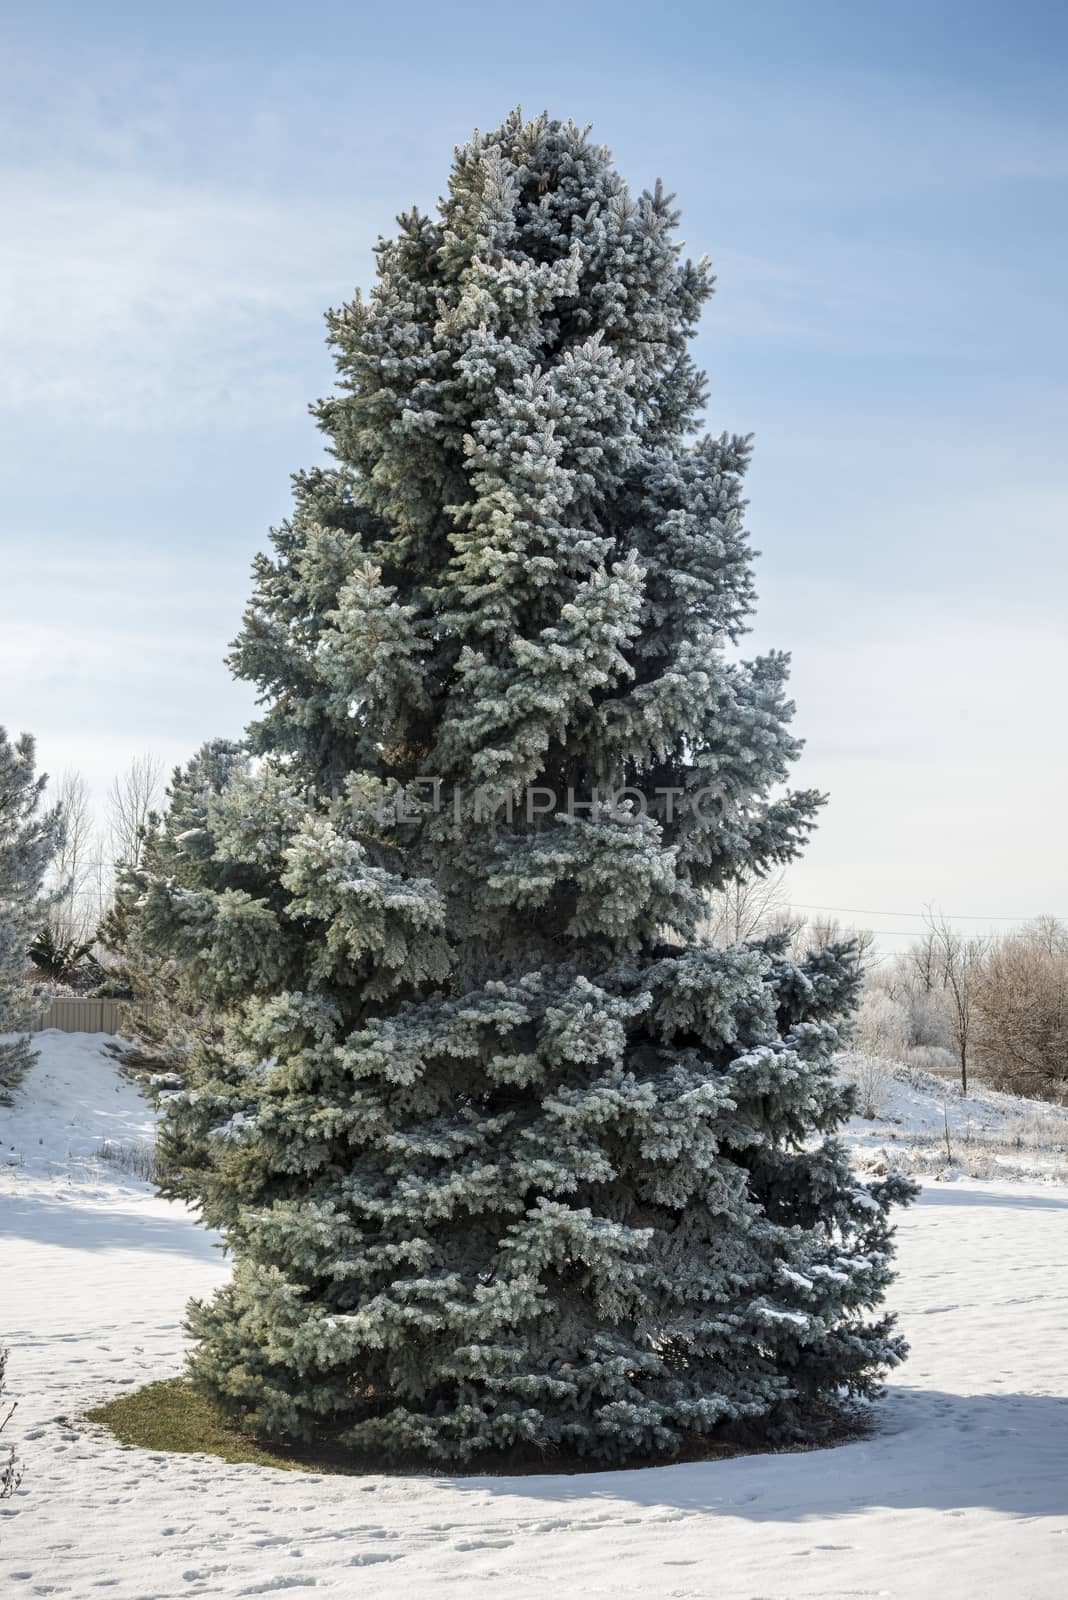 Large snow-covered pine tree in winter by Njean